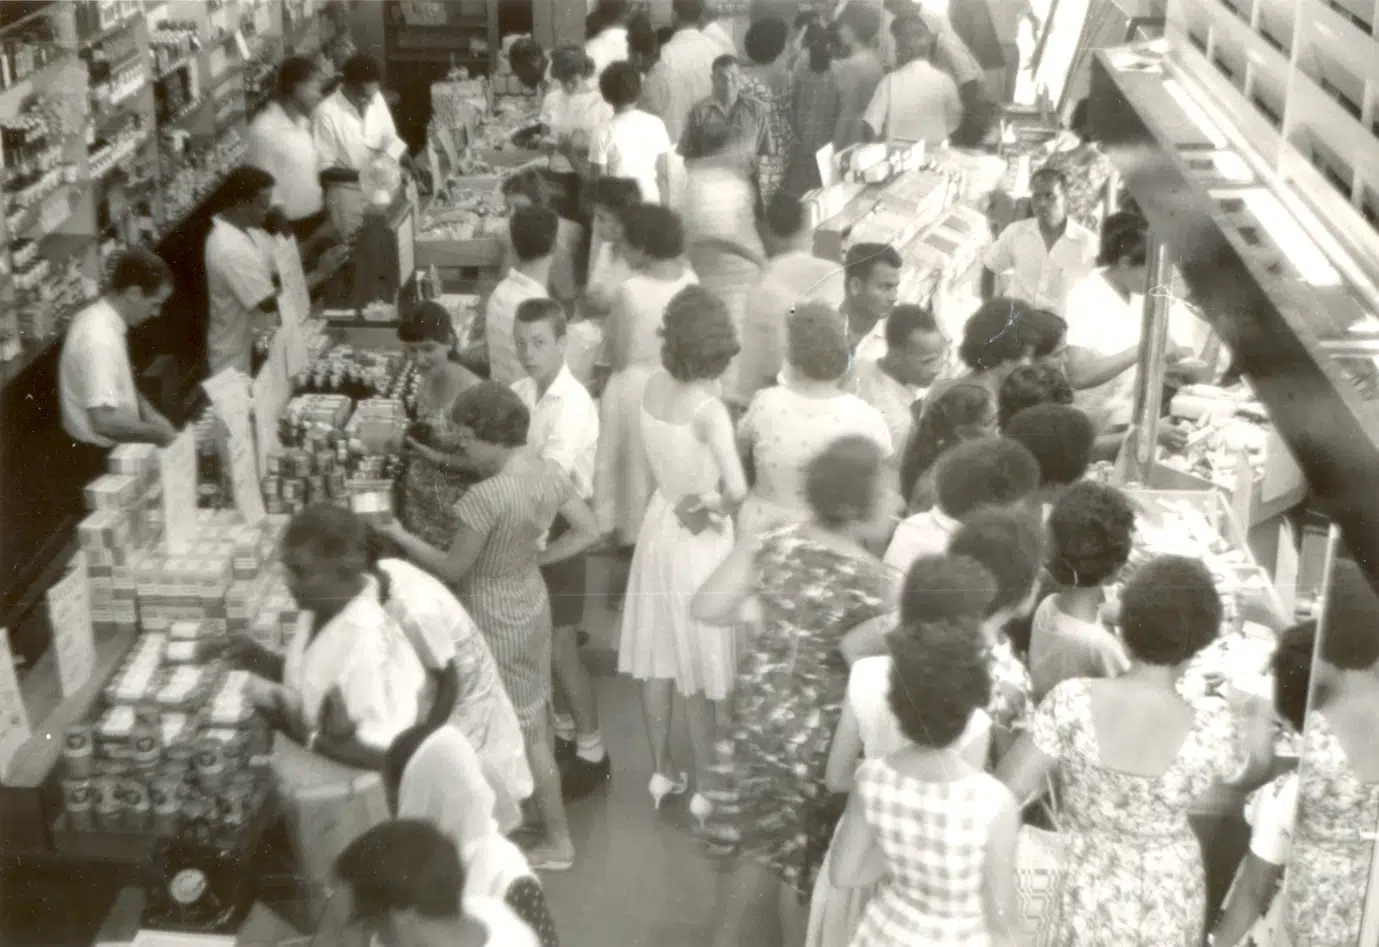 Closing sale at the Boots branch in Suva, Fiji, March 1964.